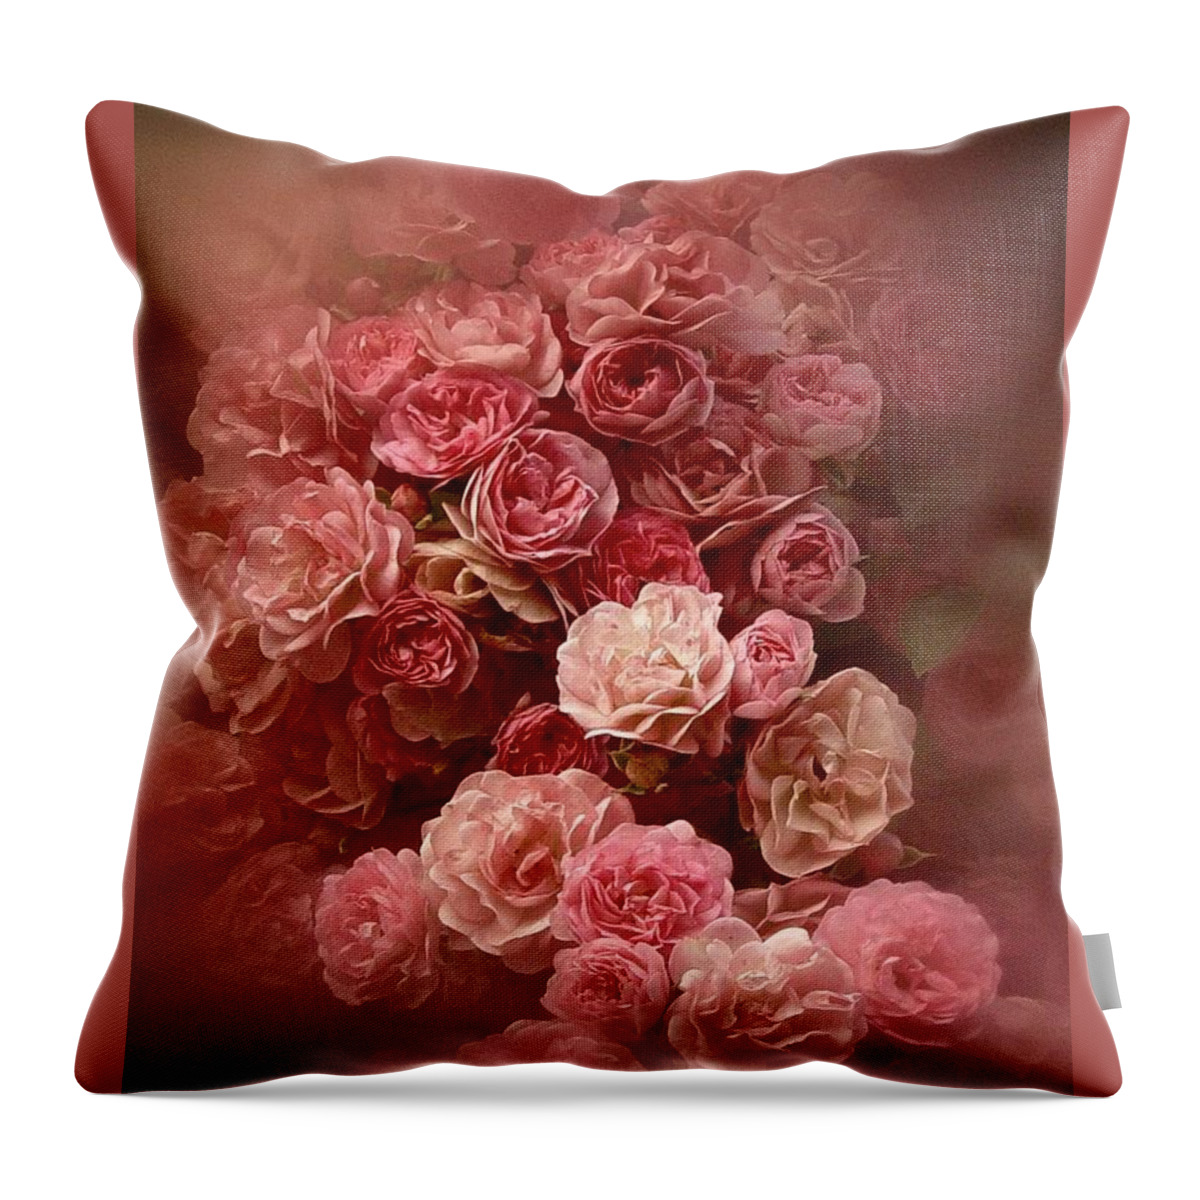 Roses Throw Pillow featuring the photograph Beautiful Roses 2016 by Richard Cummings